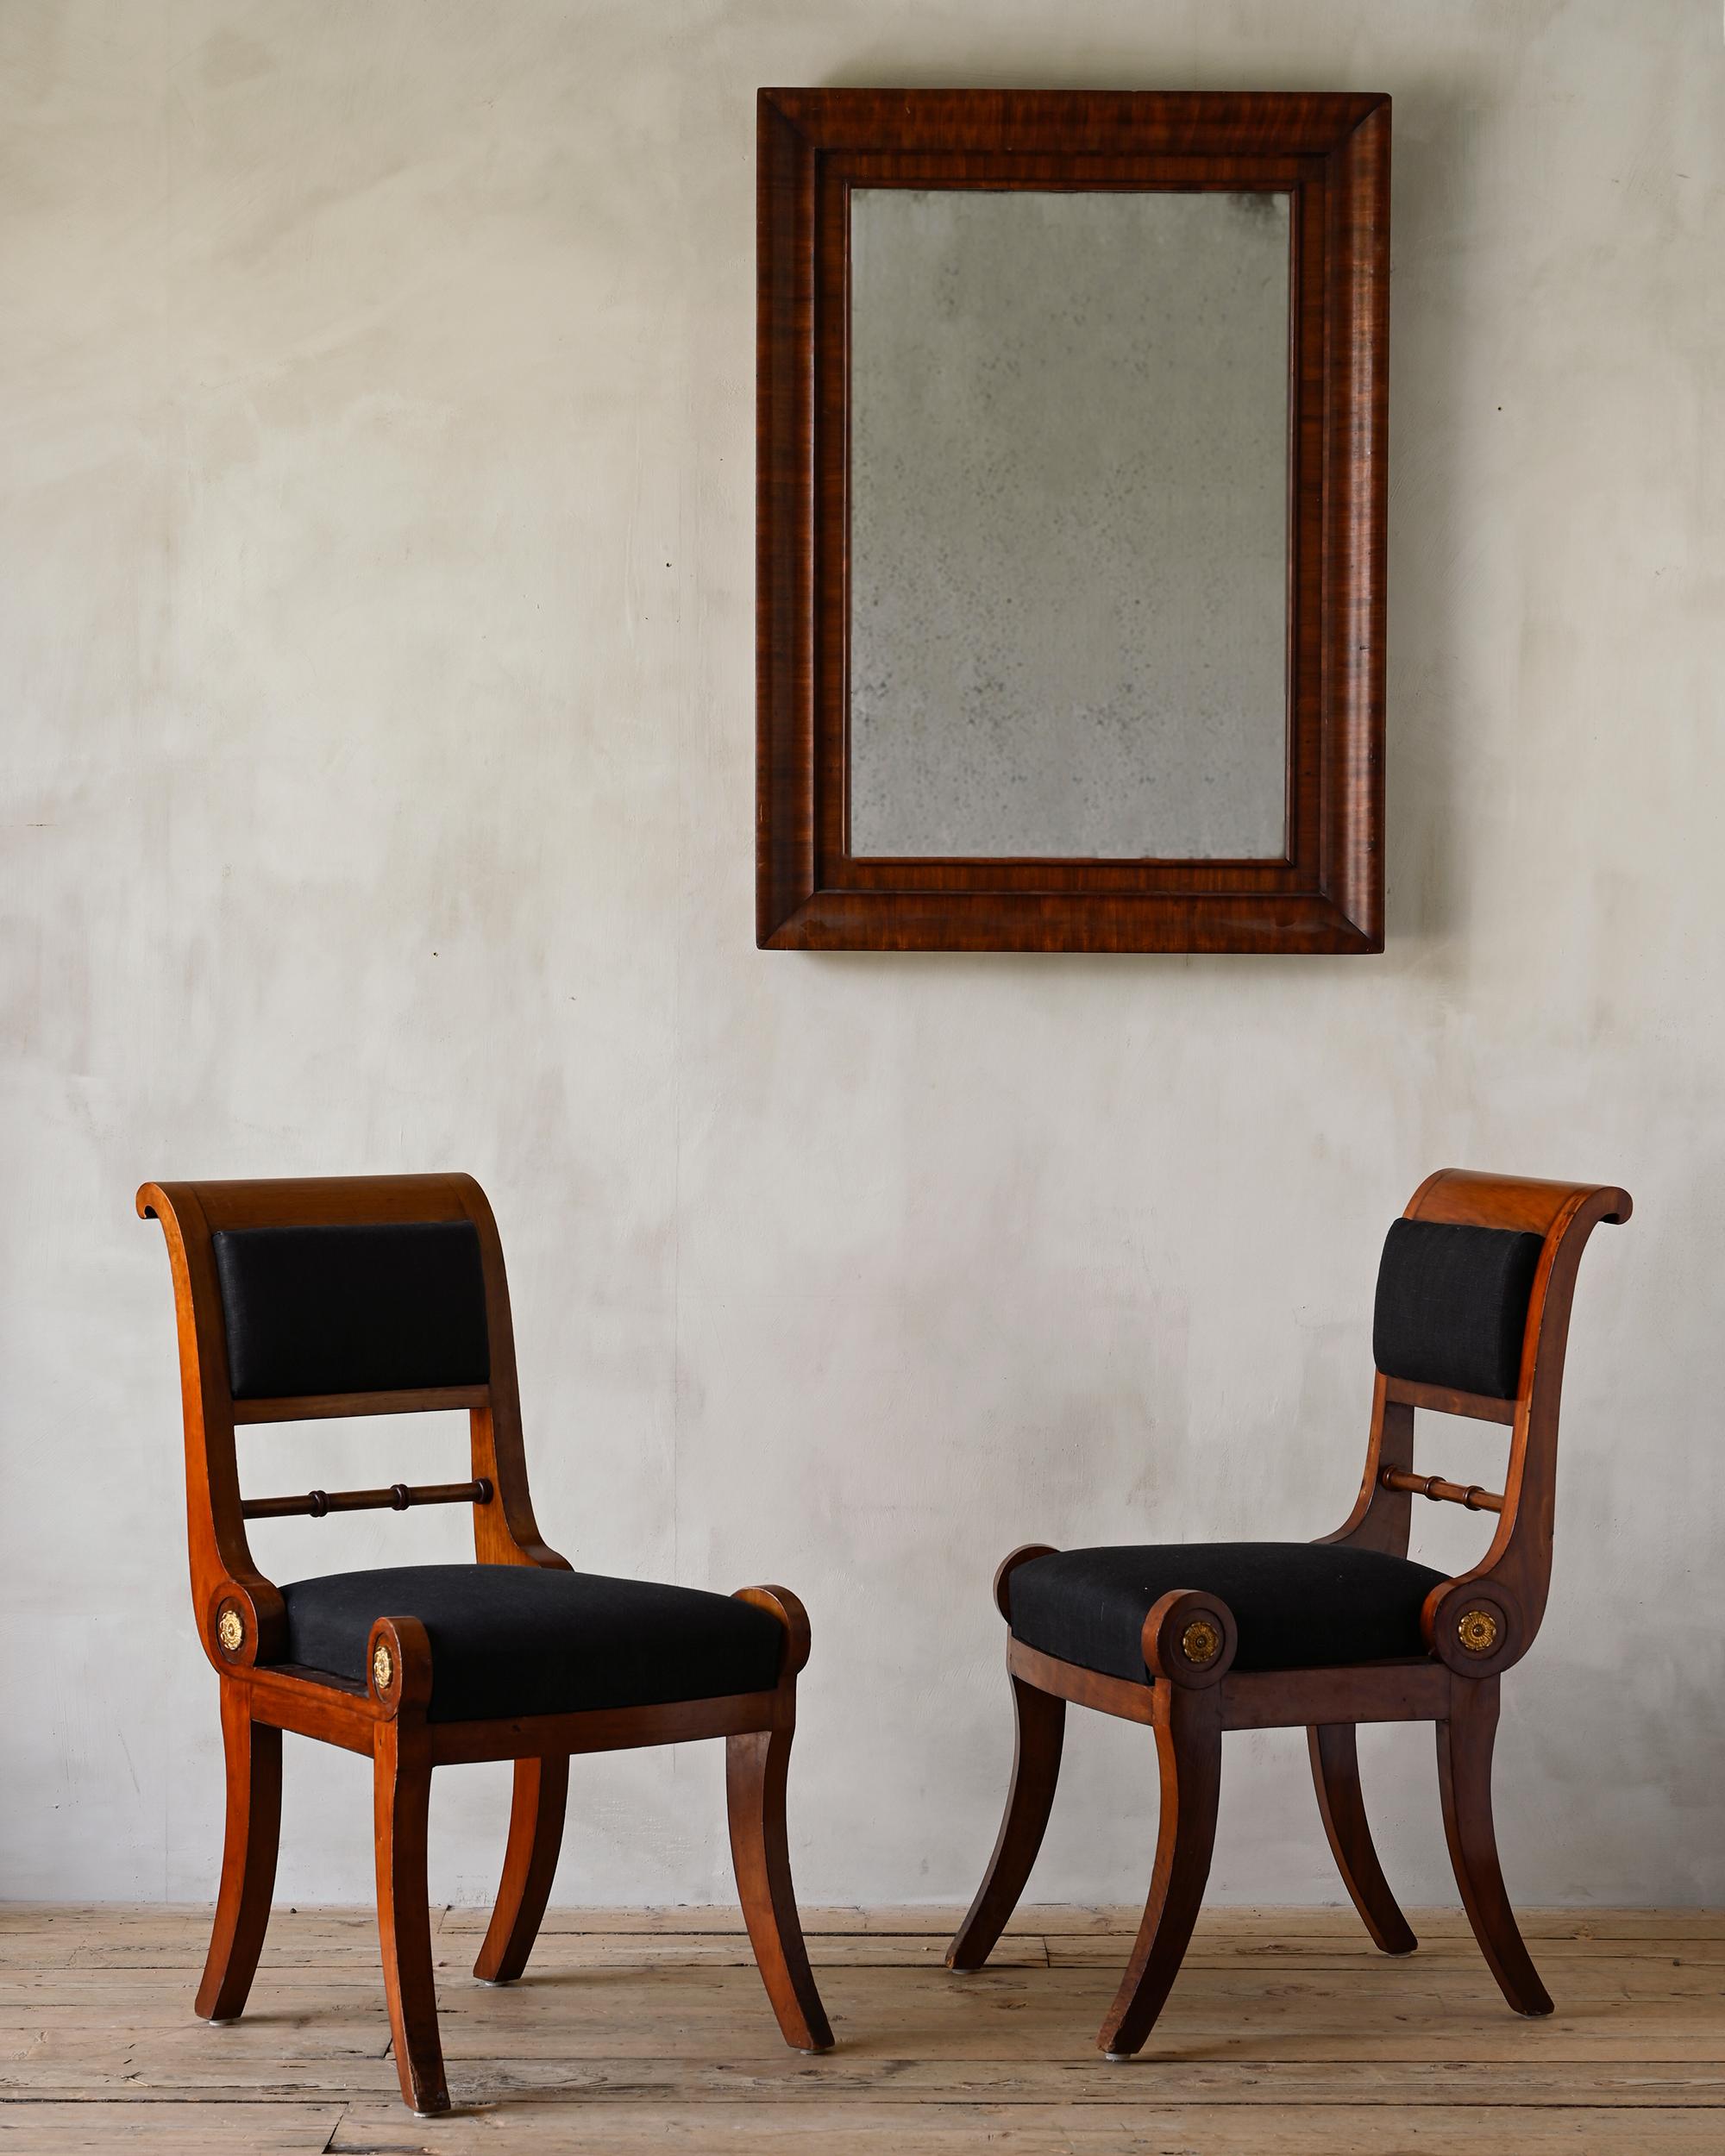 Fine pair of 19th century Swedish Empire chairs veneered with mahogany after a drawing by C. Sundvall (Architect 1754-1831). For the interior of the red salon at Skottorp, Halland 1820 - 1830.

Skottorp's castle is nobly and calmly kept, the